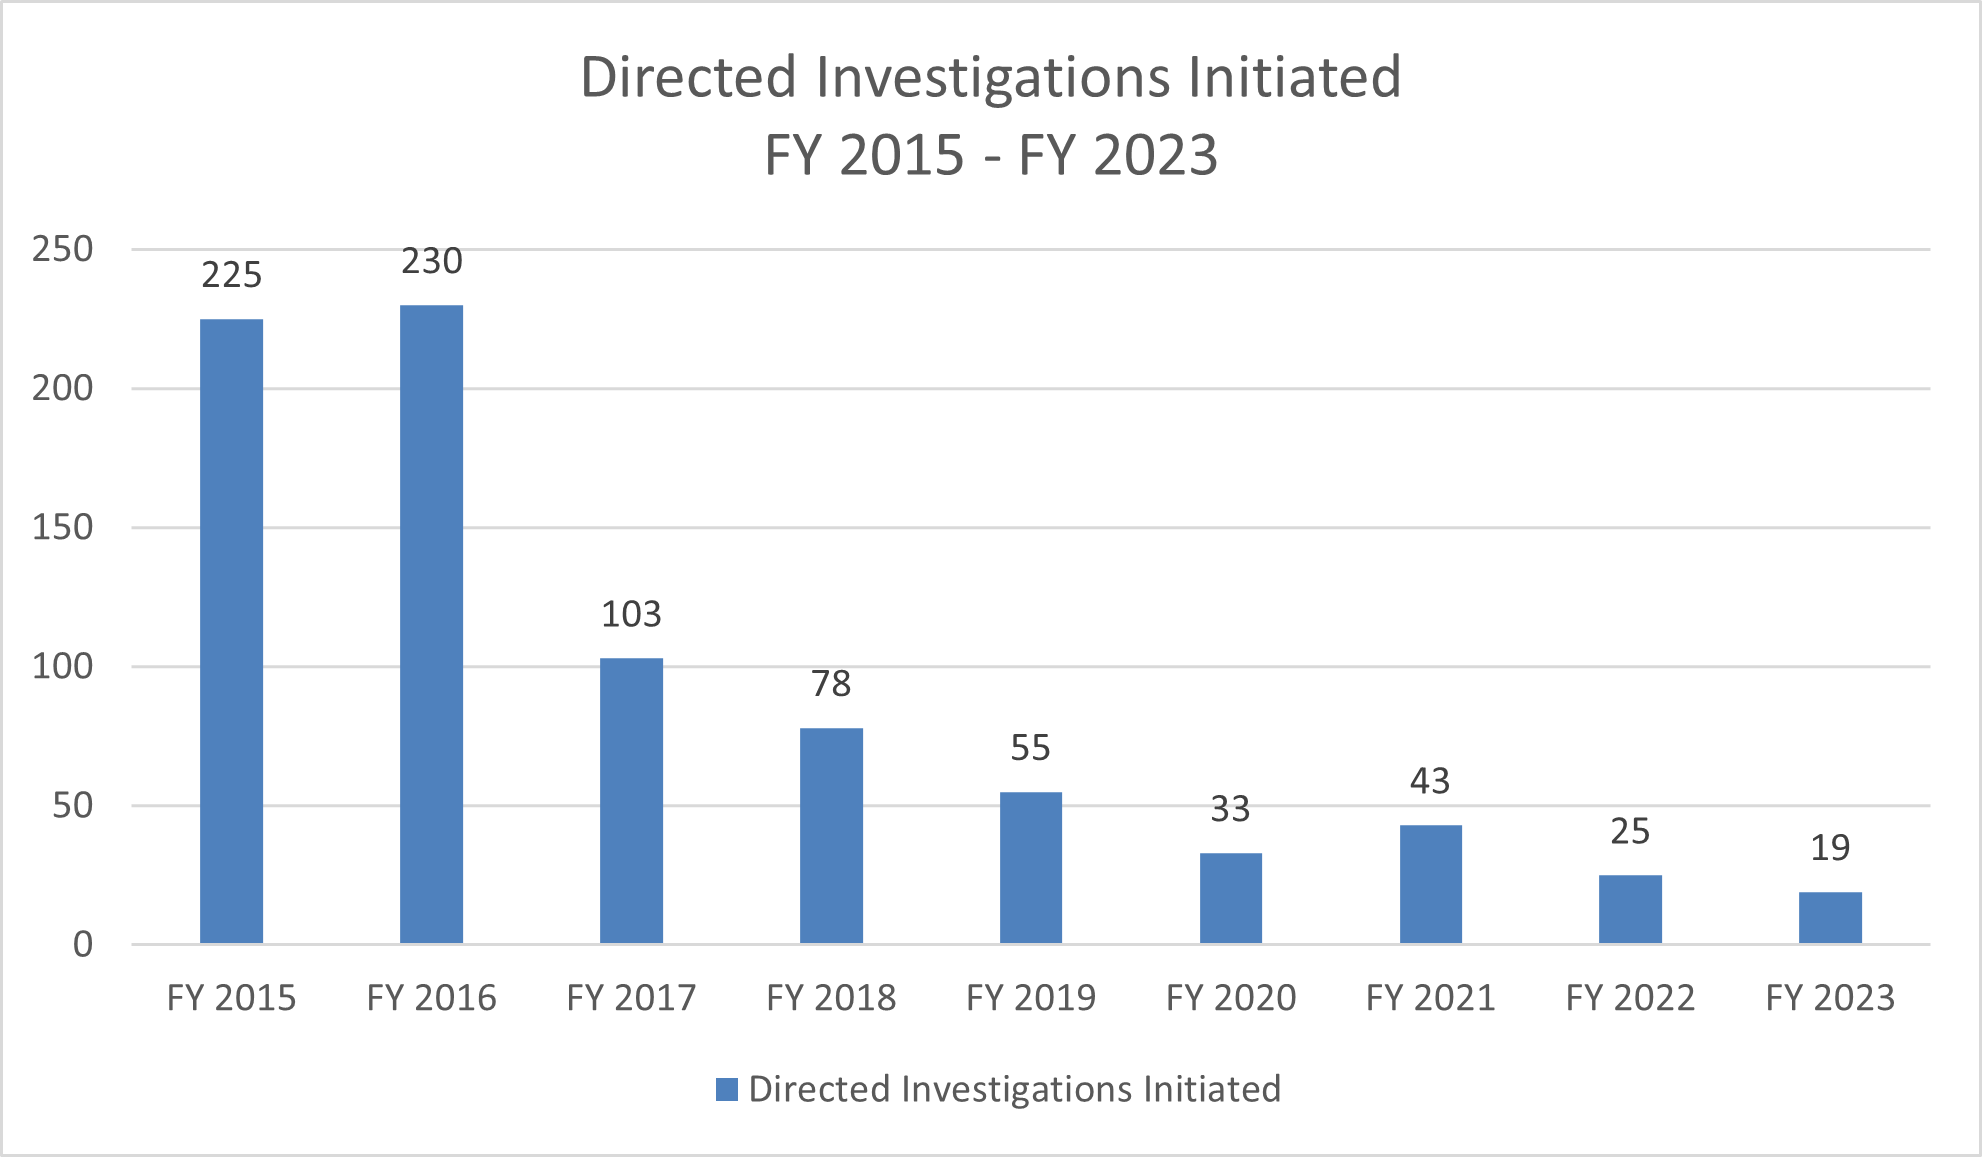 Directed Investigations Initiated FY 2015 - FY 2023